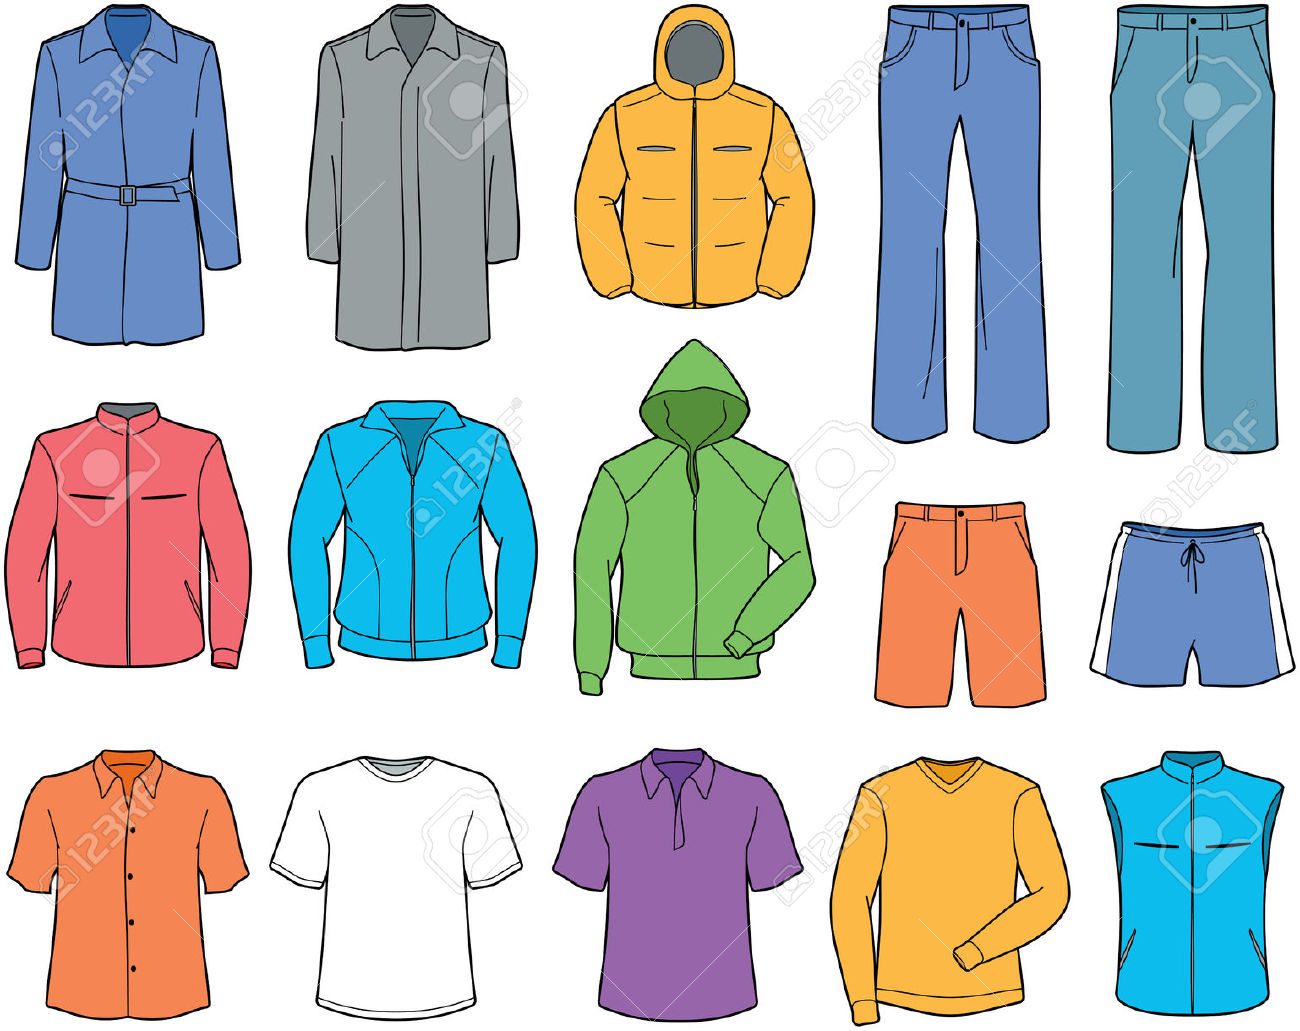 Clothers clipart - Clipground